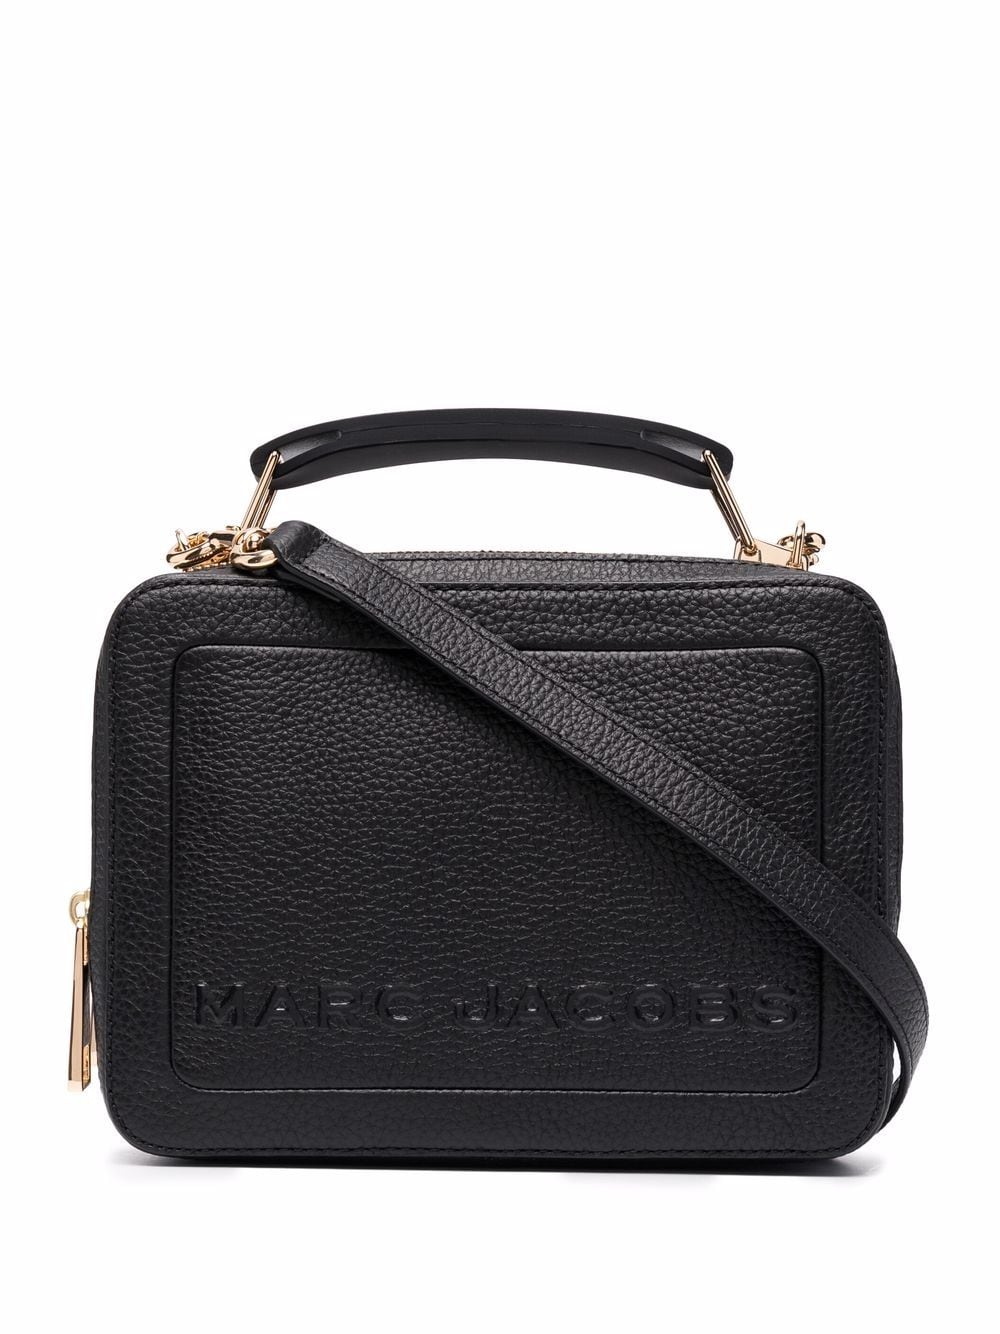 Marc Jacobs, Bags, Marc Jacobs Gray Leather Crossbody Bag